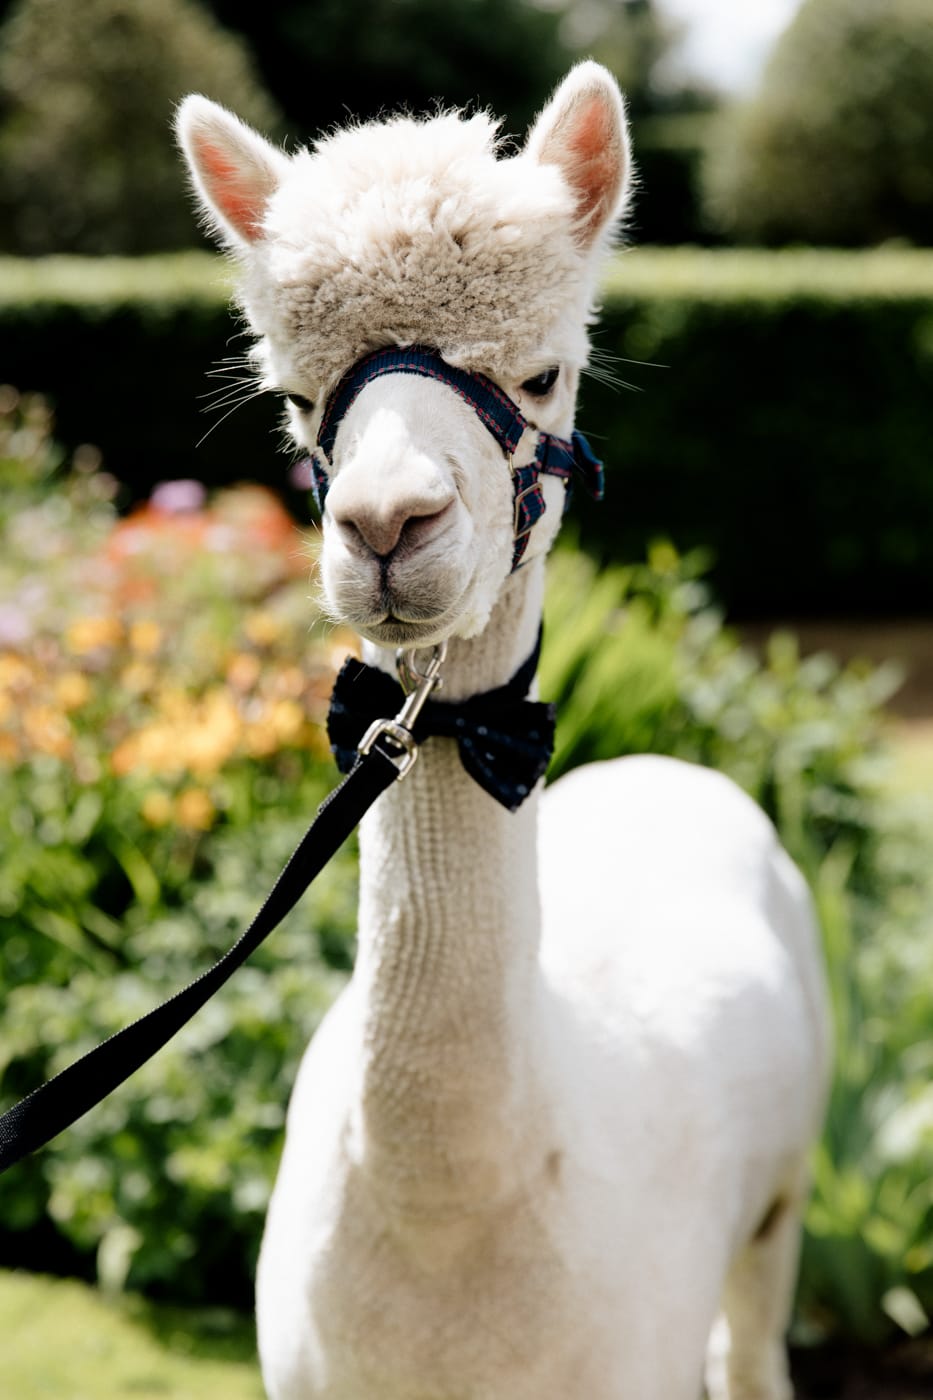 cheshire alpacas at the hilltop country house hotel in macclesfield